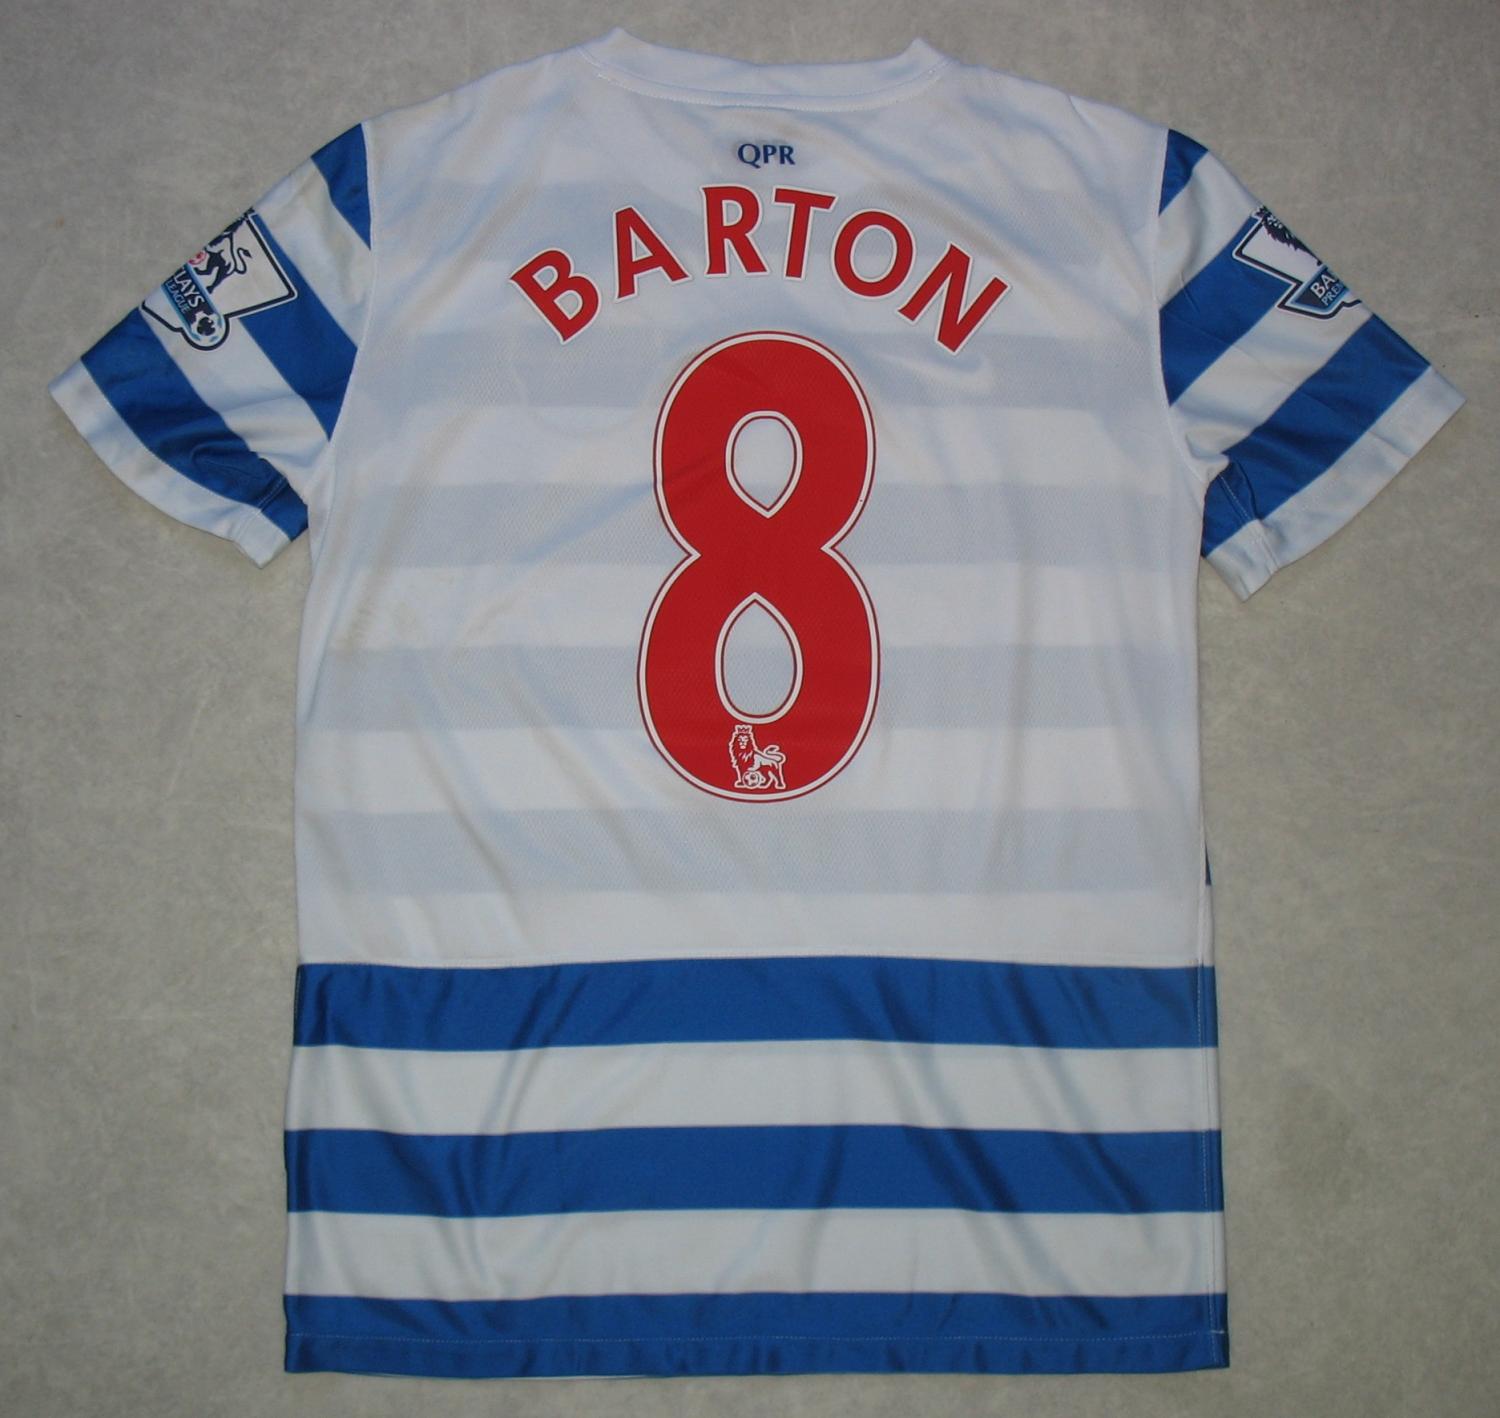 imagen Infidelidad maduro Queens Park Rangers Home football shirt 2014 - 2015. Sponsored by Air Asia